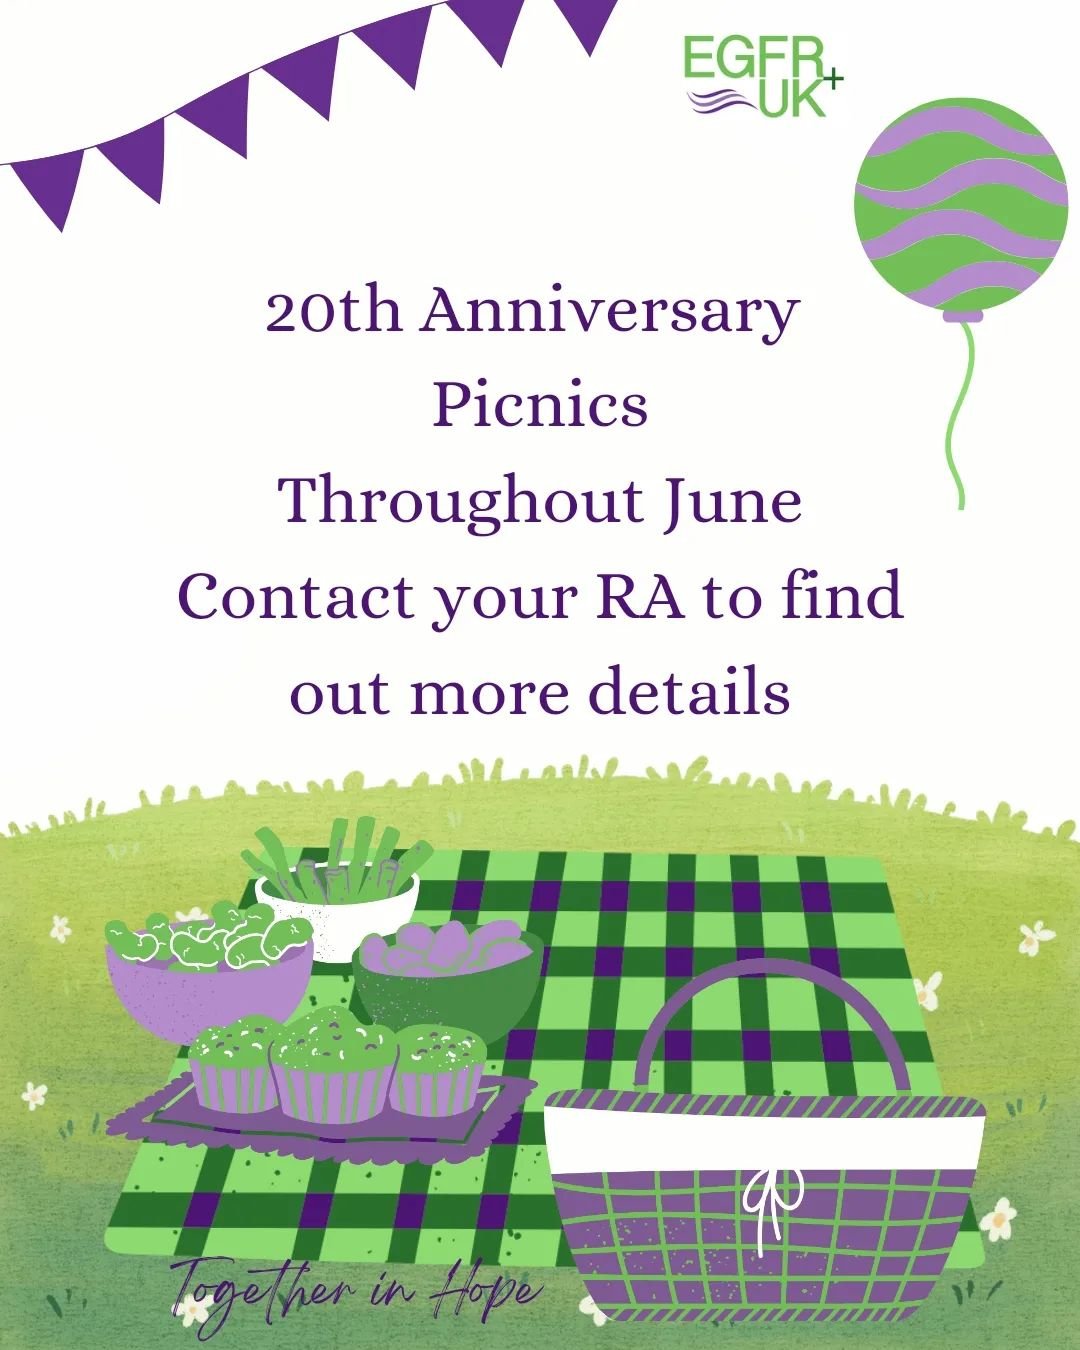 Wednesday June 12th 3024, marks 20 years of the discovery of the EGFR+ gene mutation.  Throughout the month of June, EGFR+UK will be holding a series of picnics to commemorate and celebrate the progress science has made in diagnosing and treating EGF